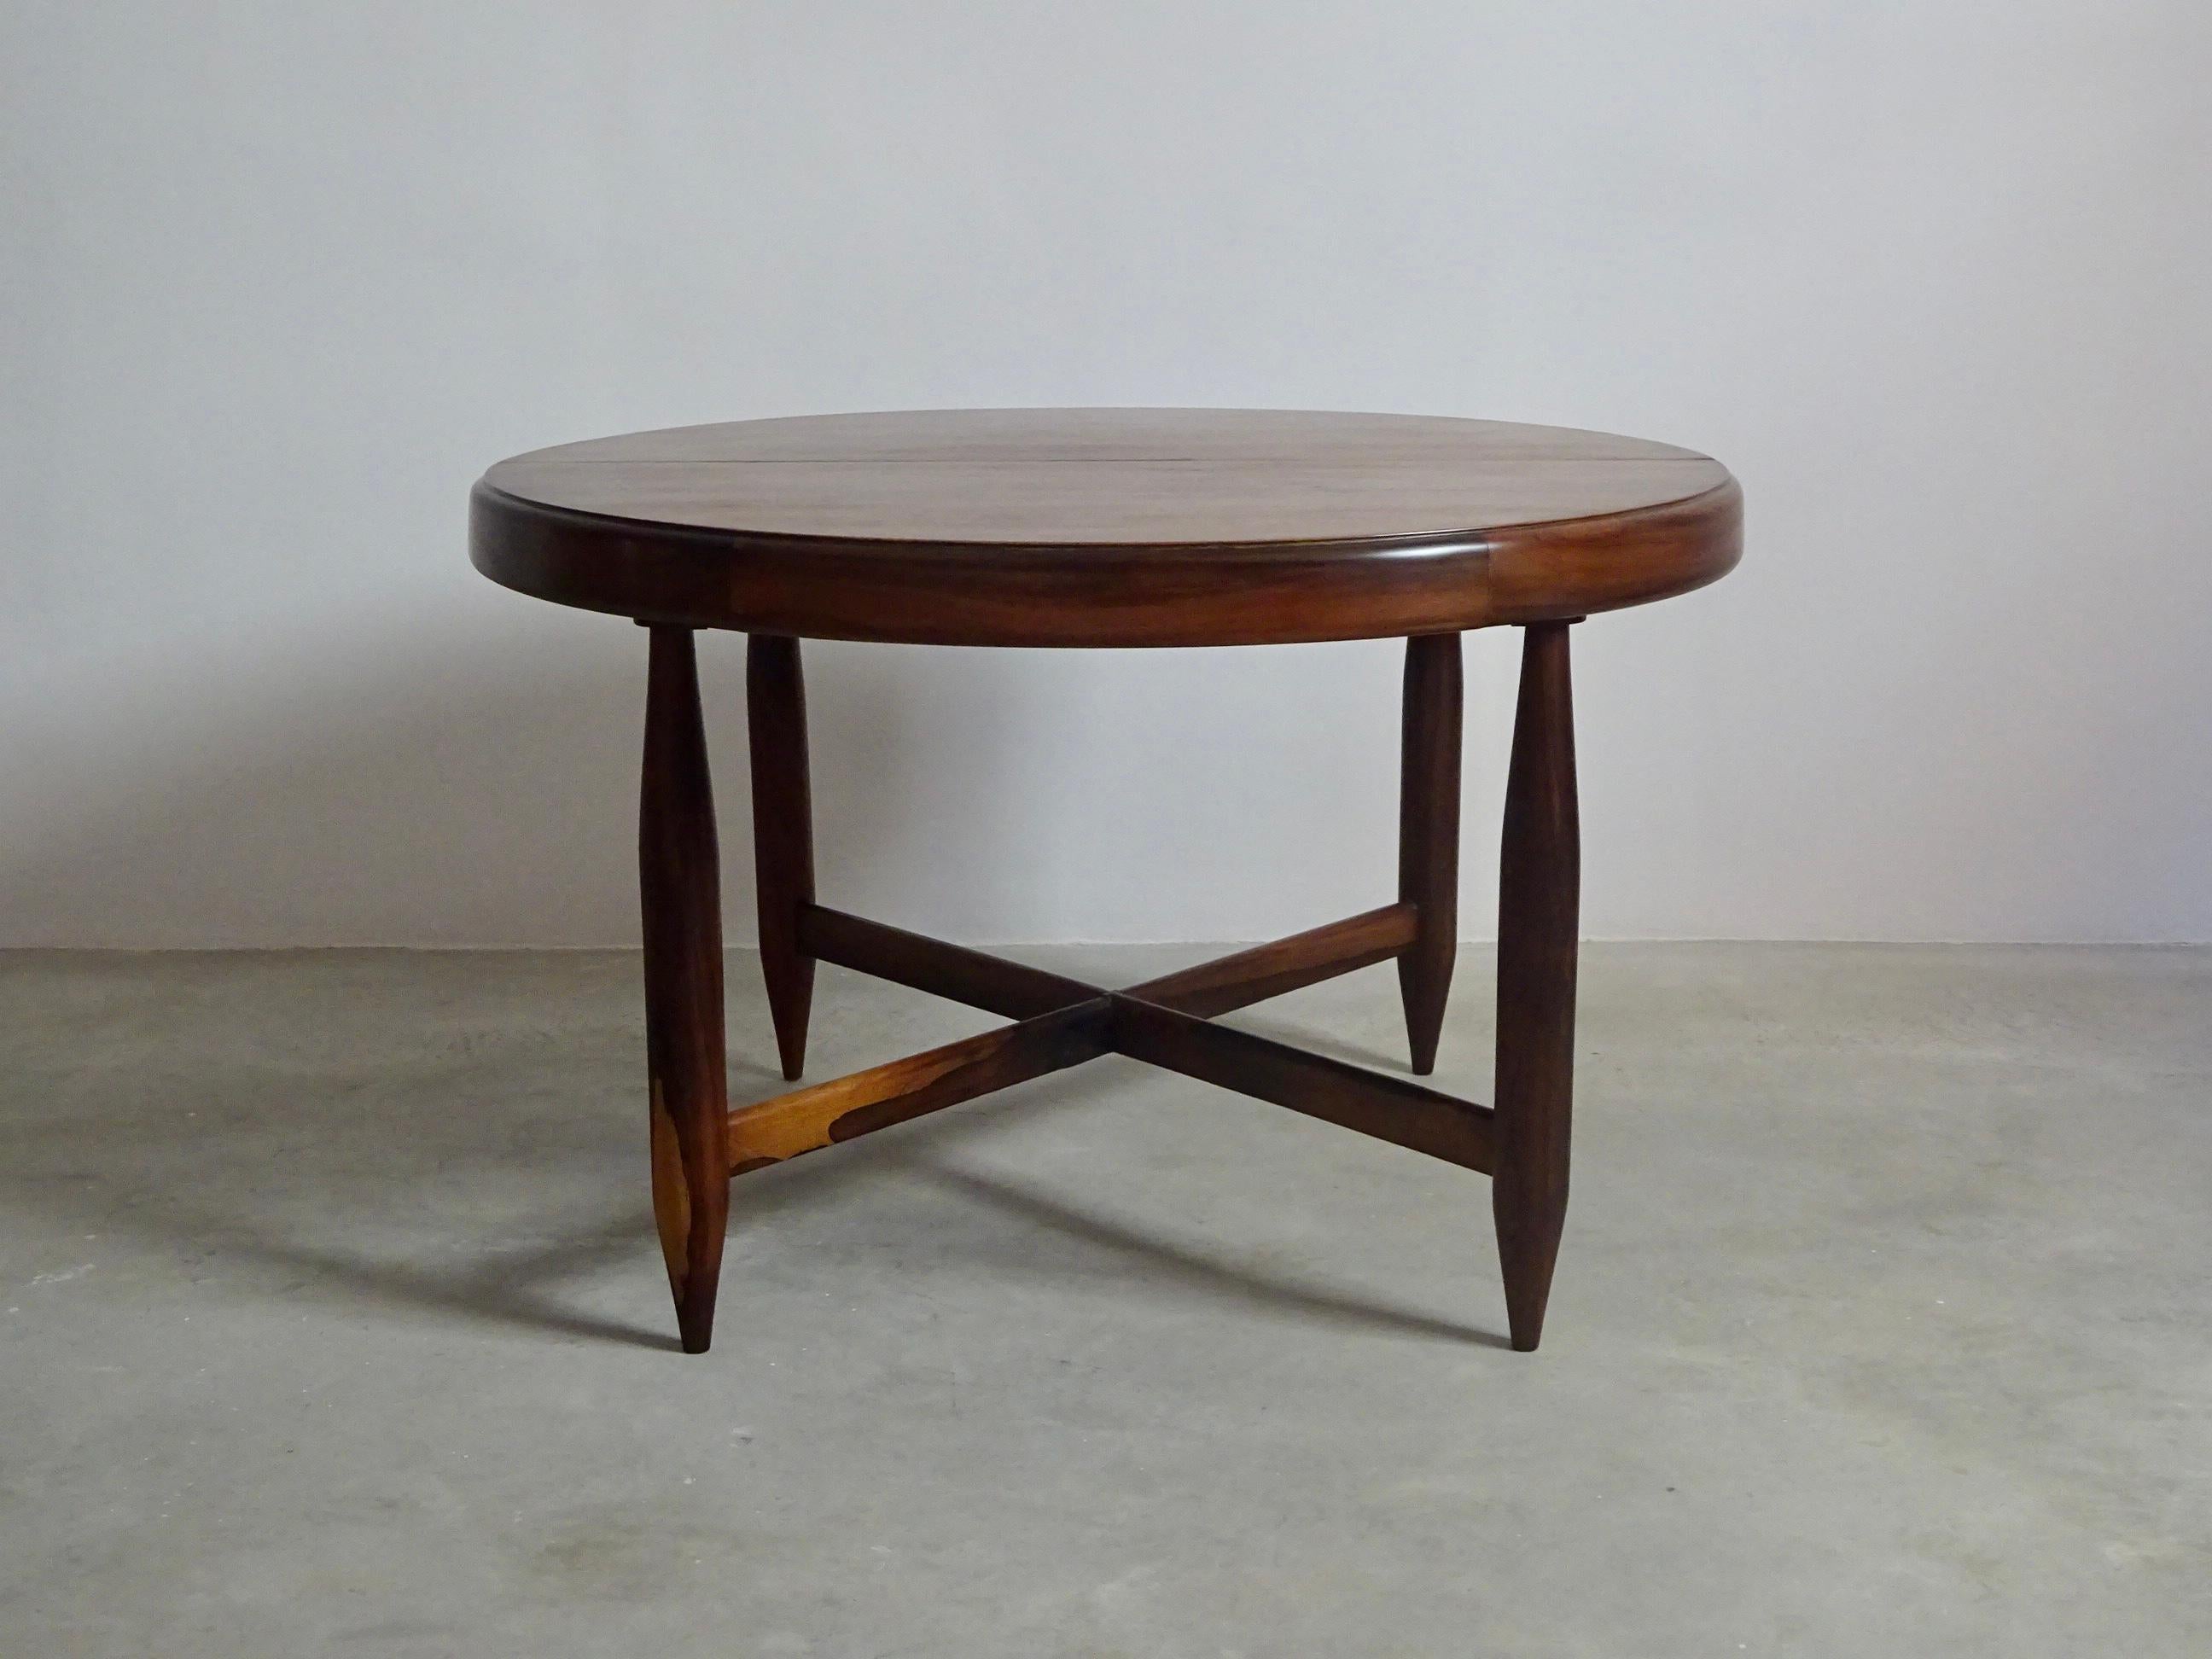 Stunning circular dining table (diameter 120cm), four legs in solid wood support the extendable table top (length 160cm).